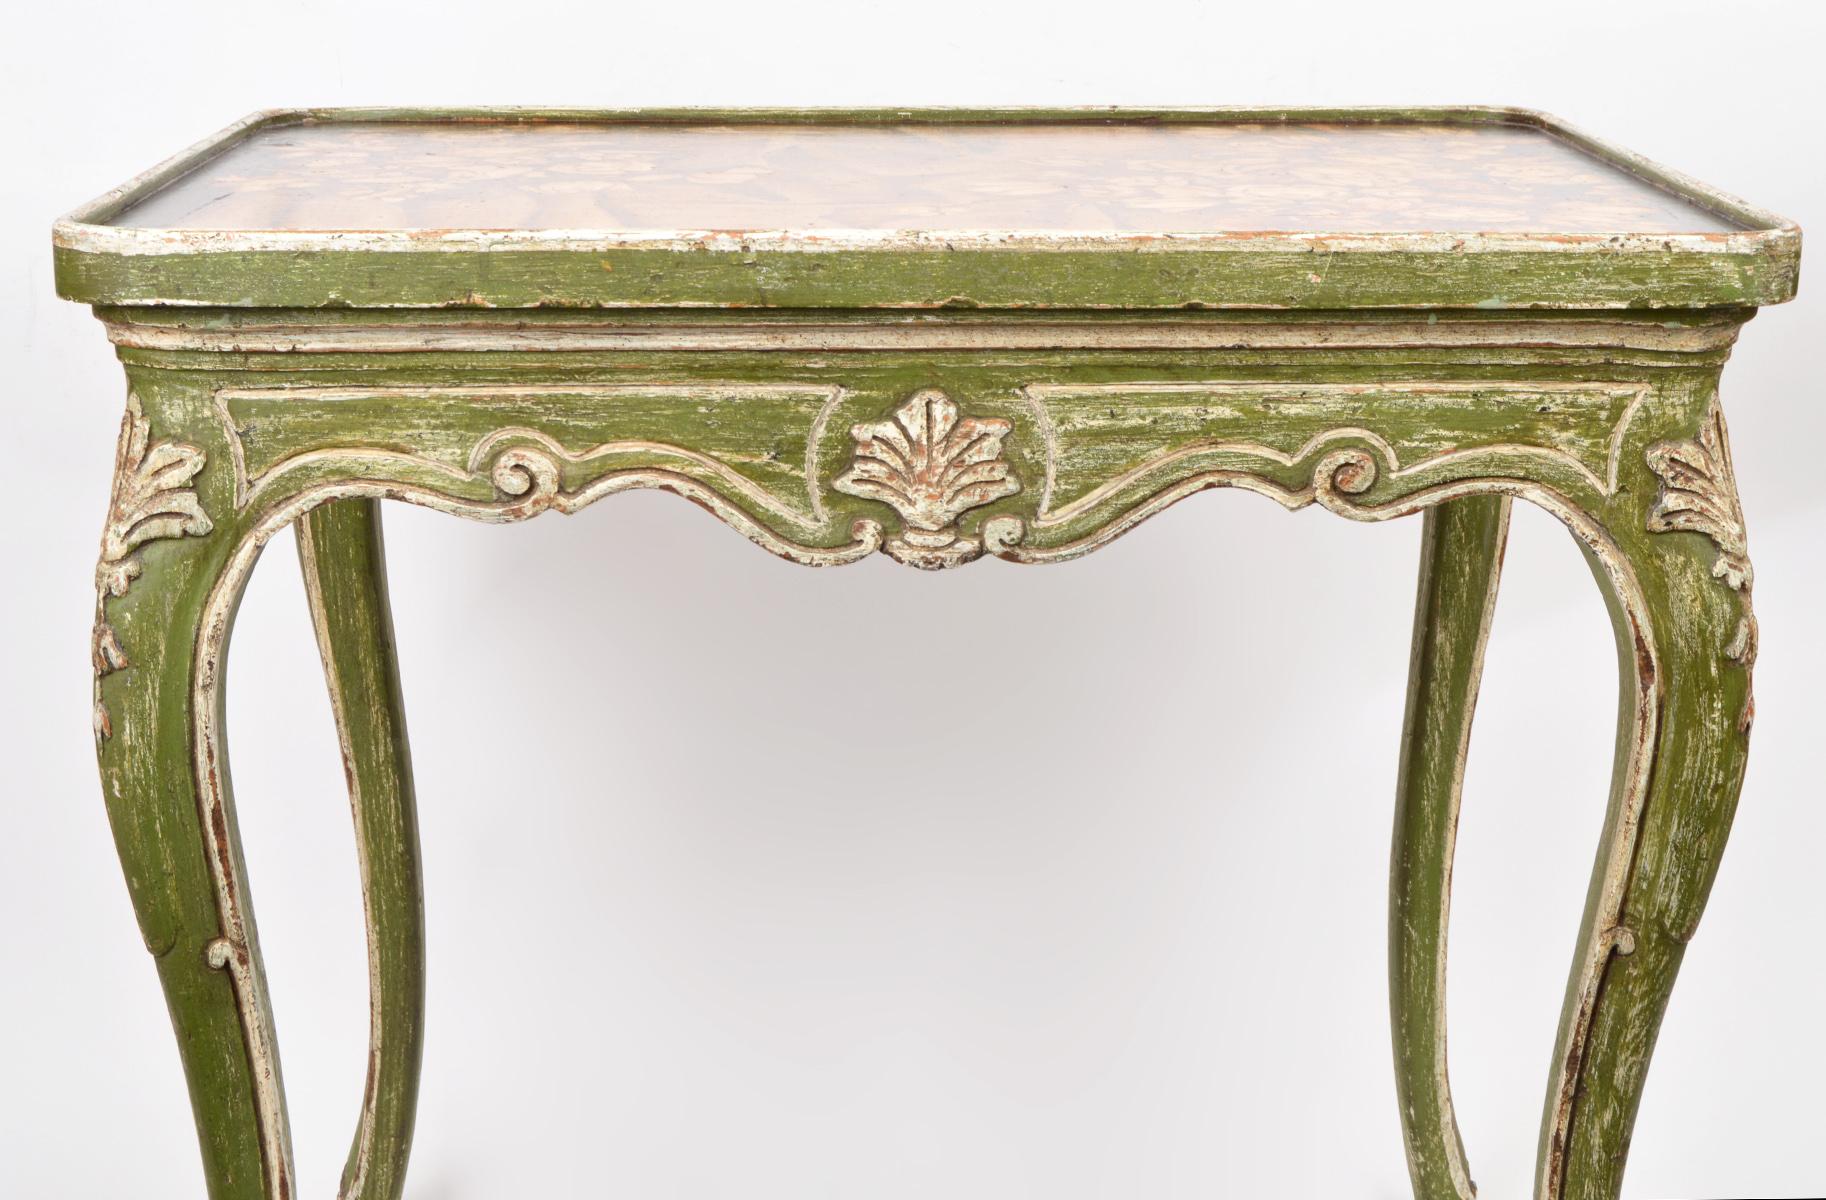 Dating to the mid 20th century this charming table in the Louis XV style features a top painted with flowers on a table cloth above a shaped, carved and decorated frame resting on four likewise carved and decorated cabriole legs. Paint and gilt